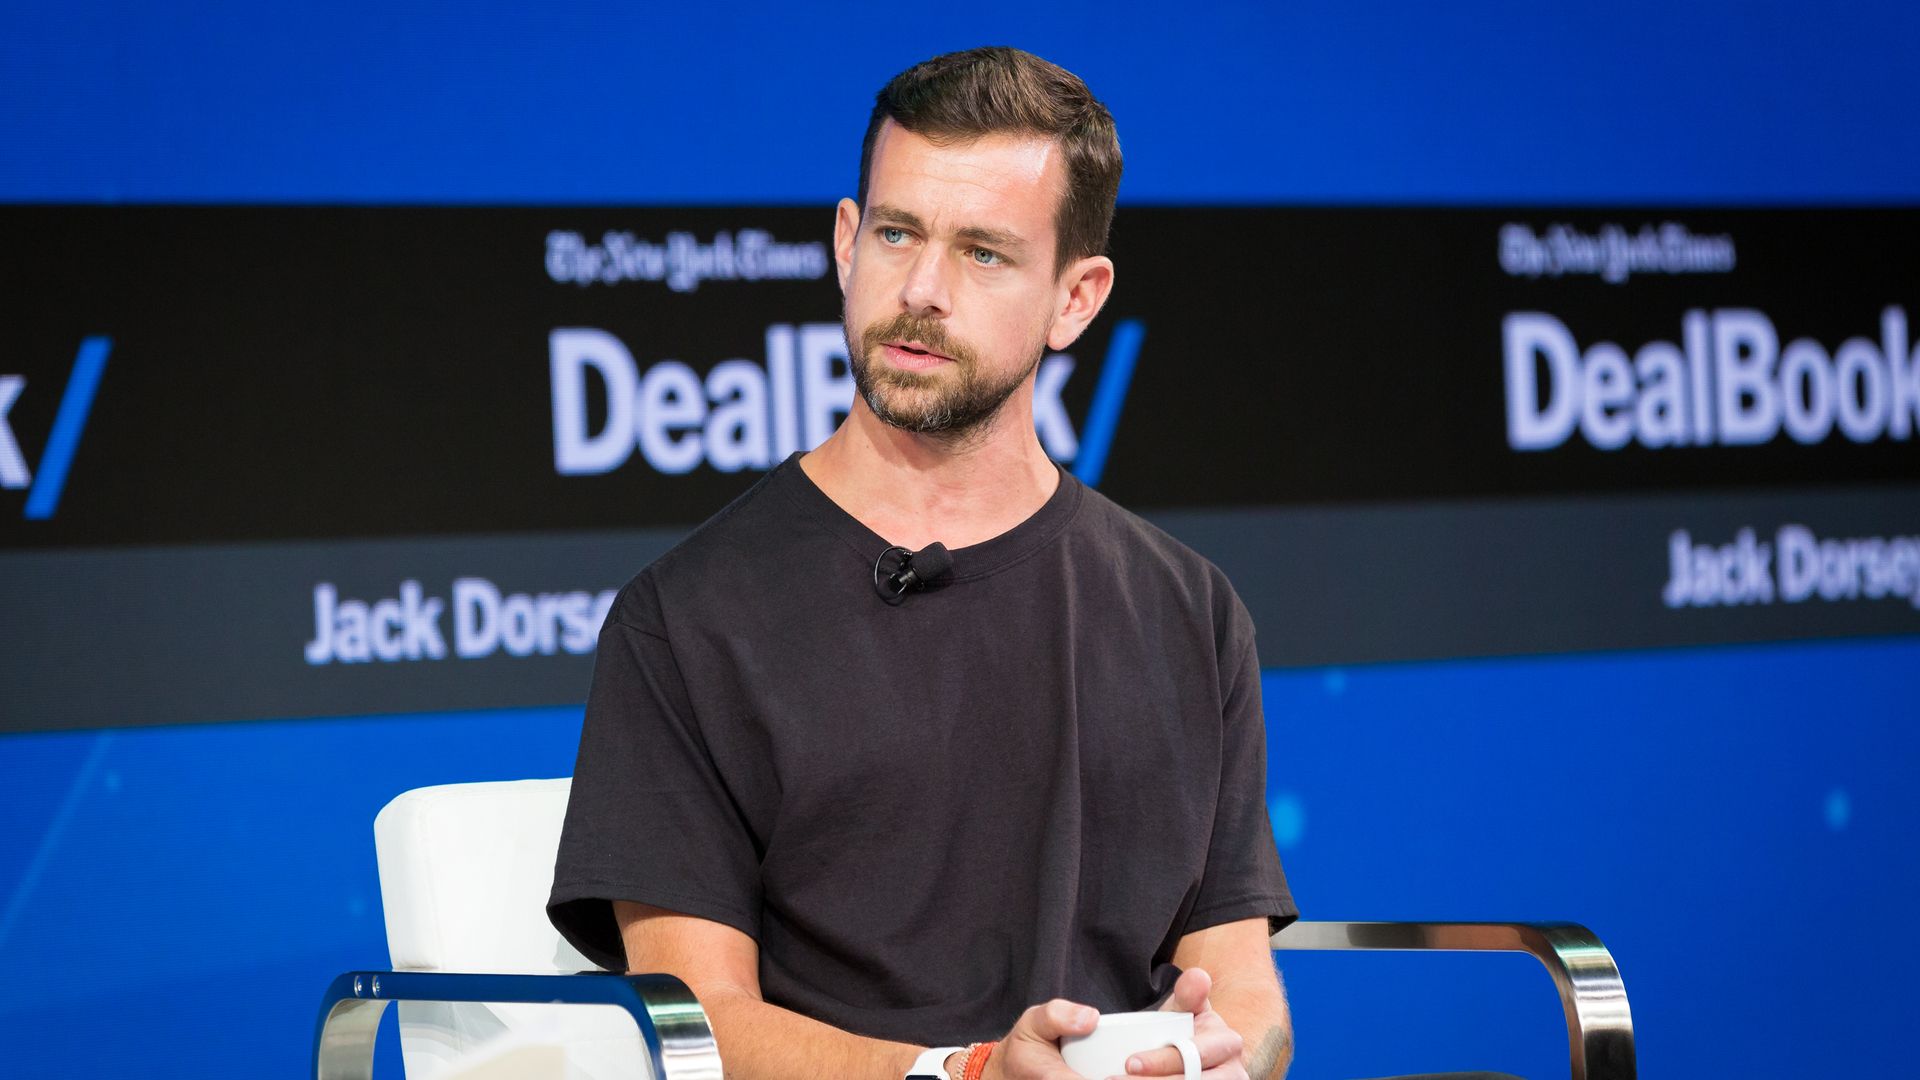 Twitter's Jack Dorsey on stage at a conference